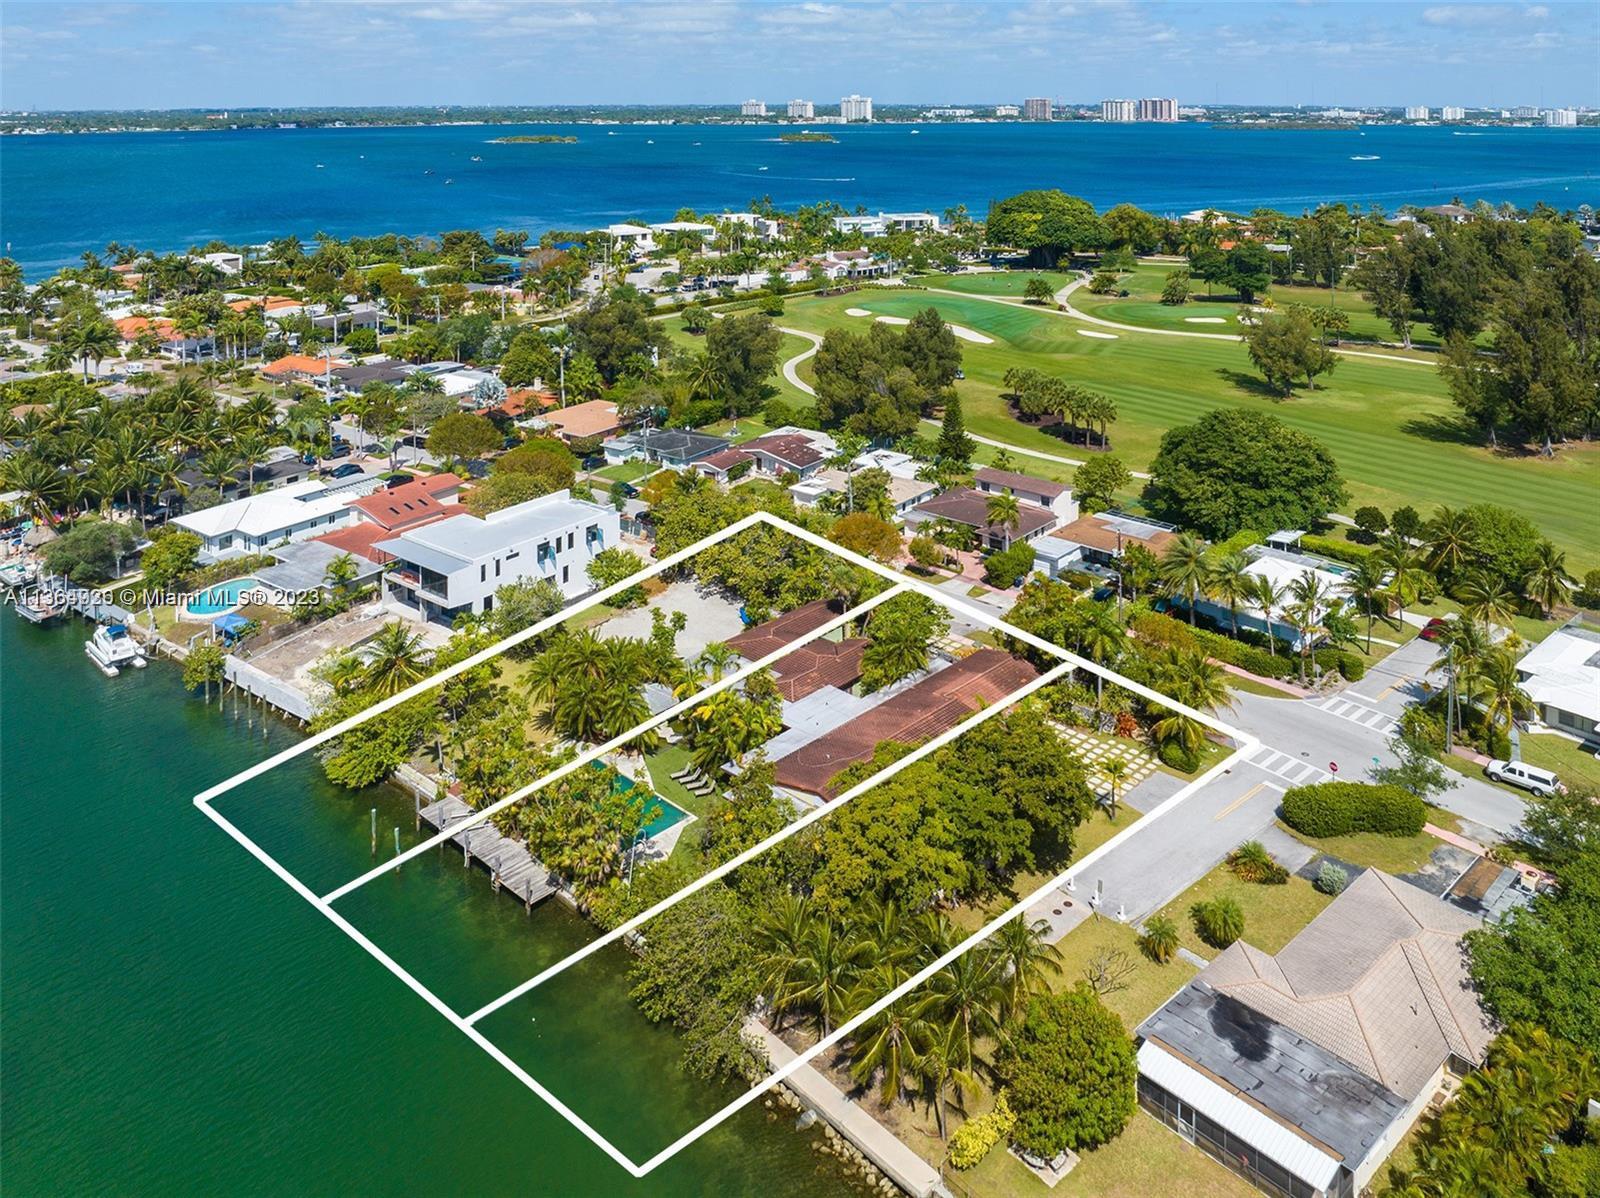 UNIQUE WATERFRONT DEVELOPMENT OPPORTUNITY IN NORMANDY SHORES. This incredible property sits on a rare-find oversize 33,368 SQFT lot w/ 180FT of water frontage in the exclusive golf-gated community of Normandy Shores. Just 15’ from Bal Harbour, South Beach & Wynwood, one of the most desirable waterfront luxury living spots in Miami Beach offers golf, tennis courts, park and more. An amazing opportunity to build a state-of-the-art 16,000 SQFT Mansion, or subdivided land into 2 or 3 lots to build some incredible homes. Each 11,120 SFT lot could accommodate a 5,500 SQFT, 2 story residence, w/ 5bd/5ba, chef kitchen, family/media rooms, 2 car garage, private pool, secluded garden, summer kitchen & boat dock. LUXURY WATERFRONT LIVING EXPERIENCE AT ITS BEST!